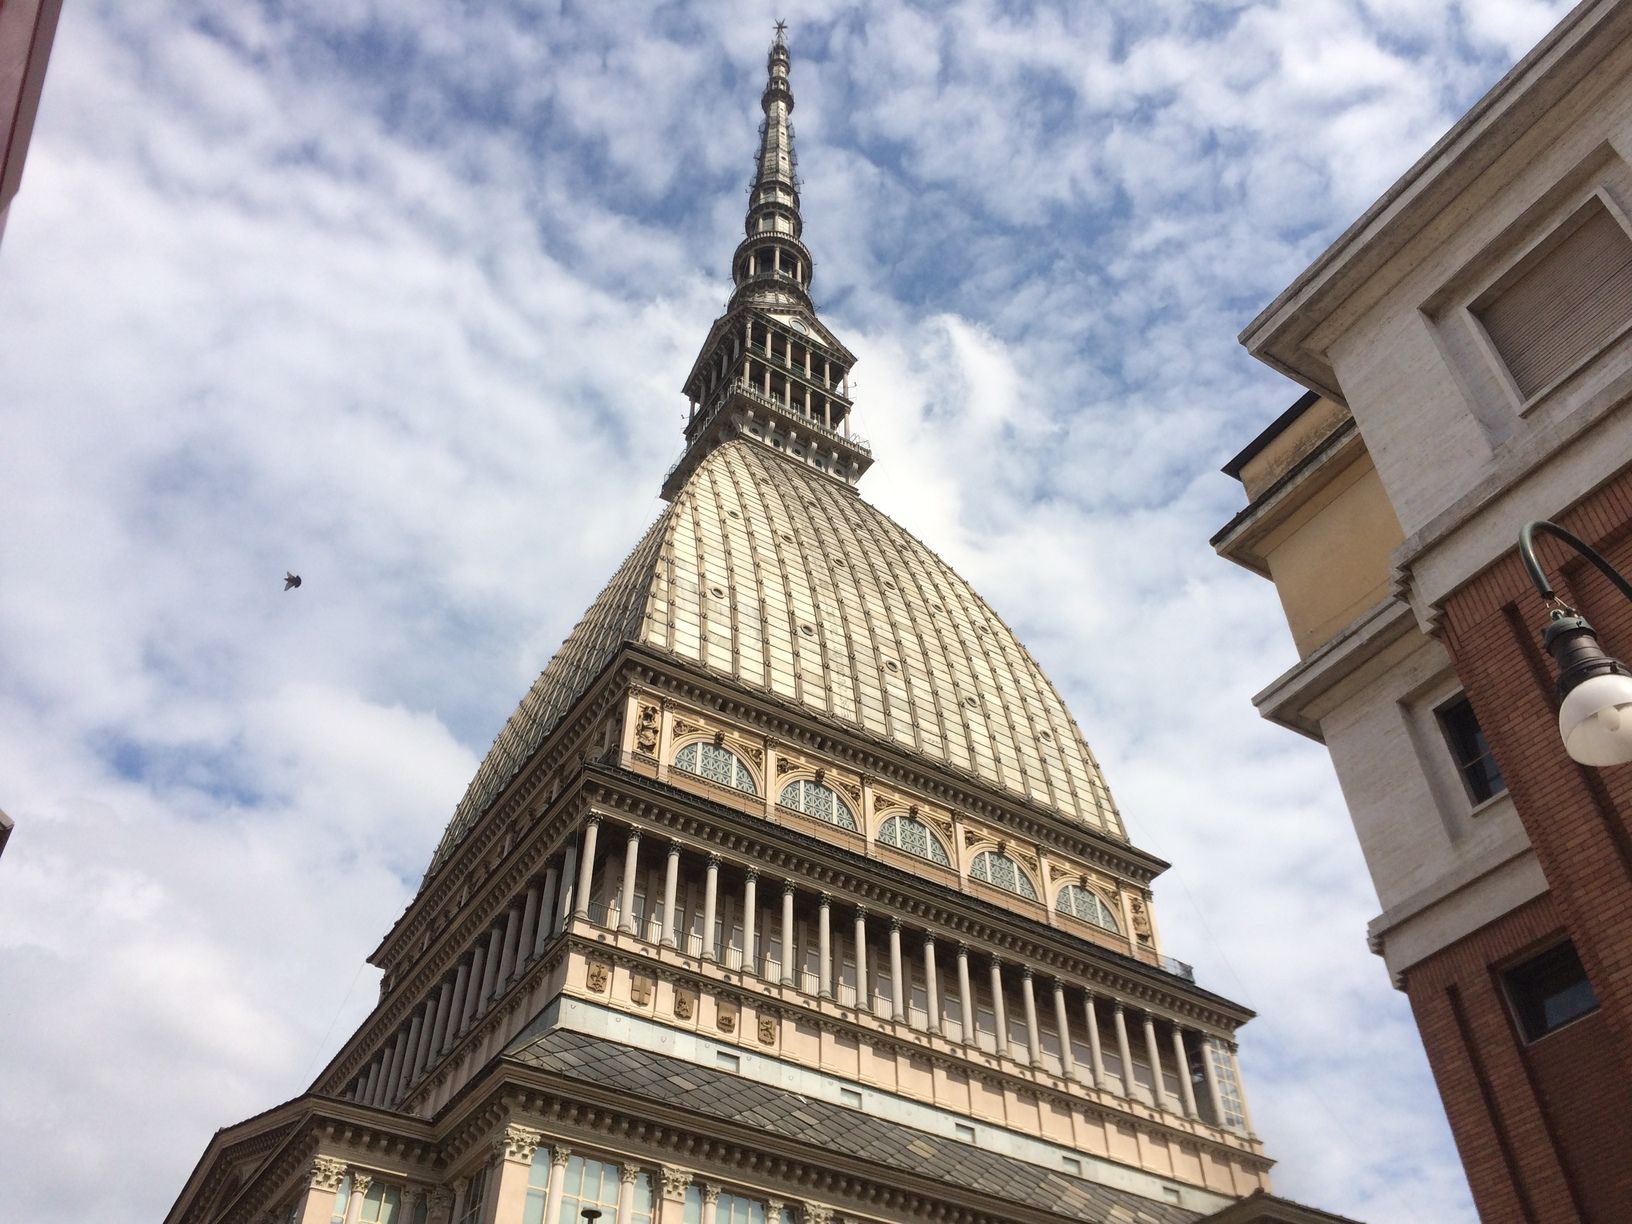 Easter weekend to discover Turin